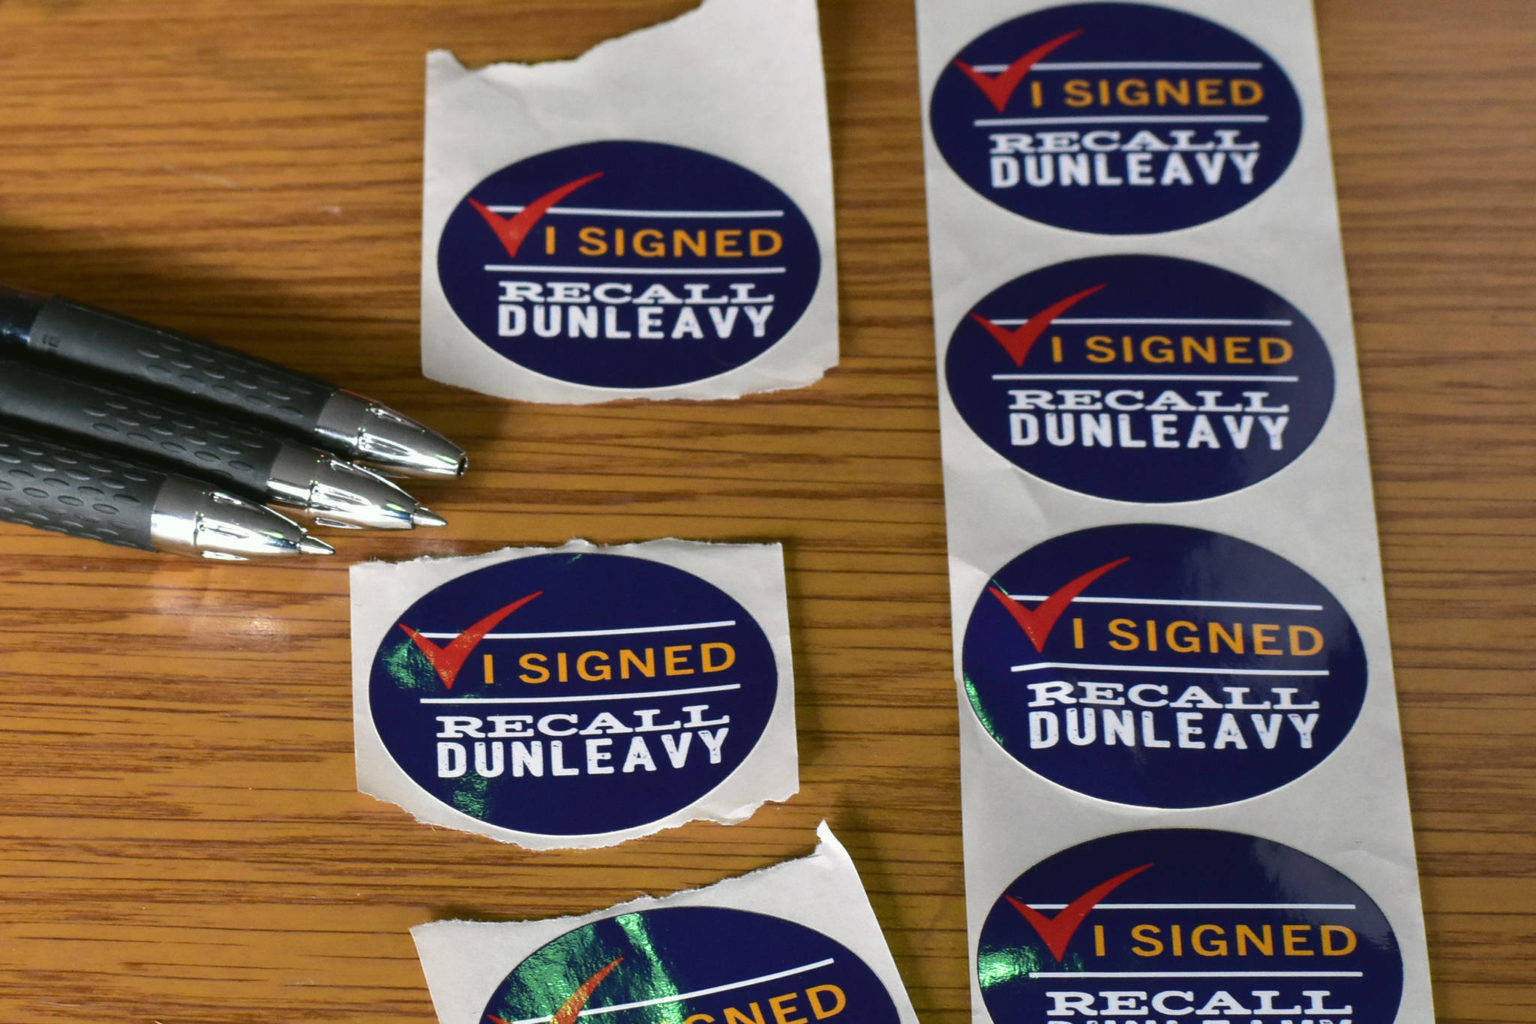 Juneauites gathered signatures to recall Gov. Mike Dunleavy in late February. (Peter Segall | Juneau Empire)